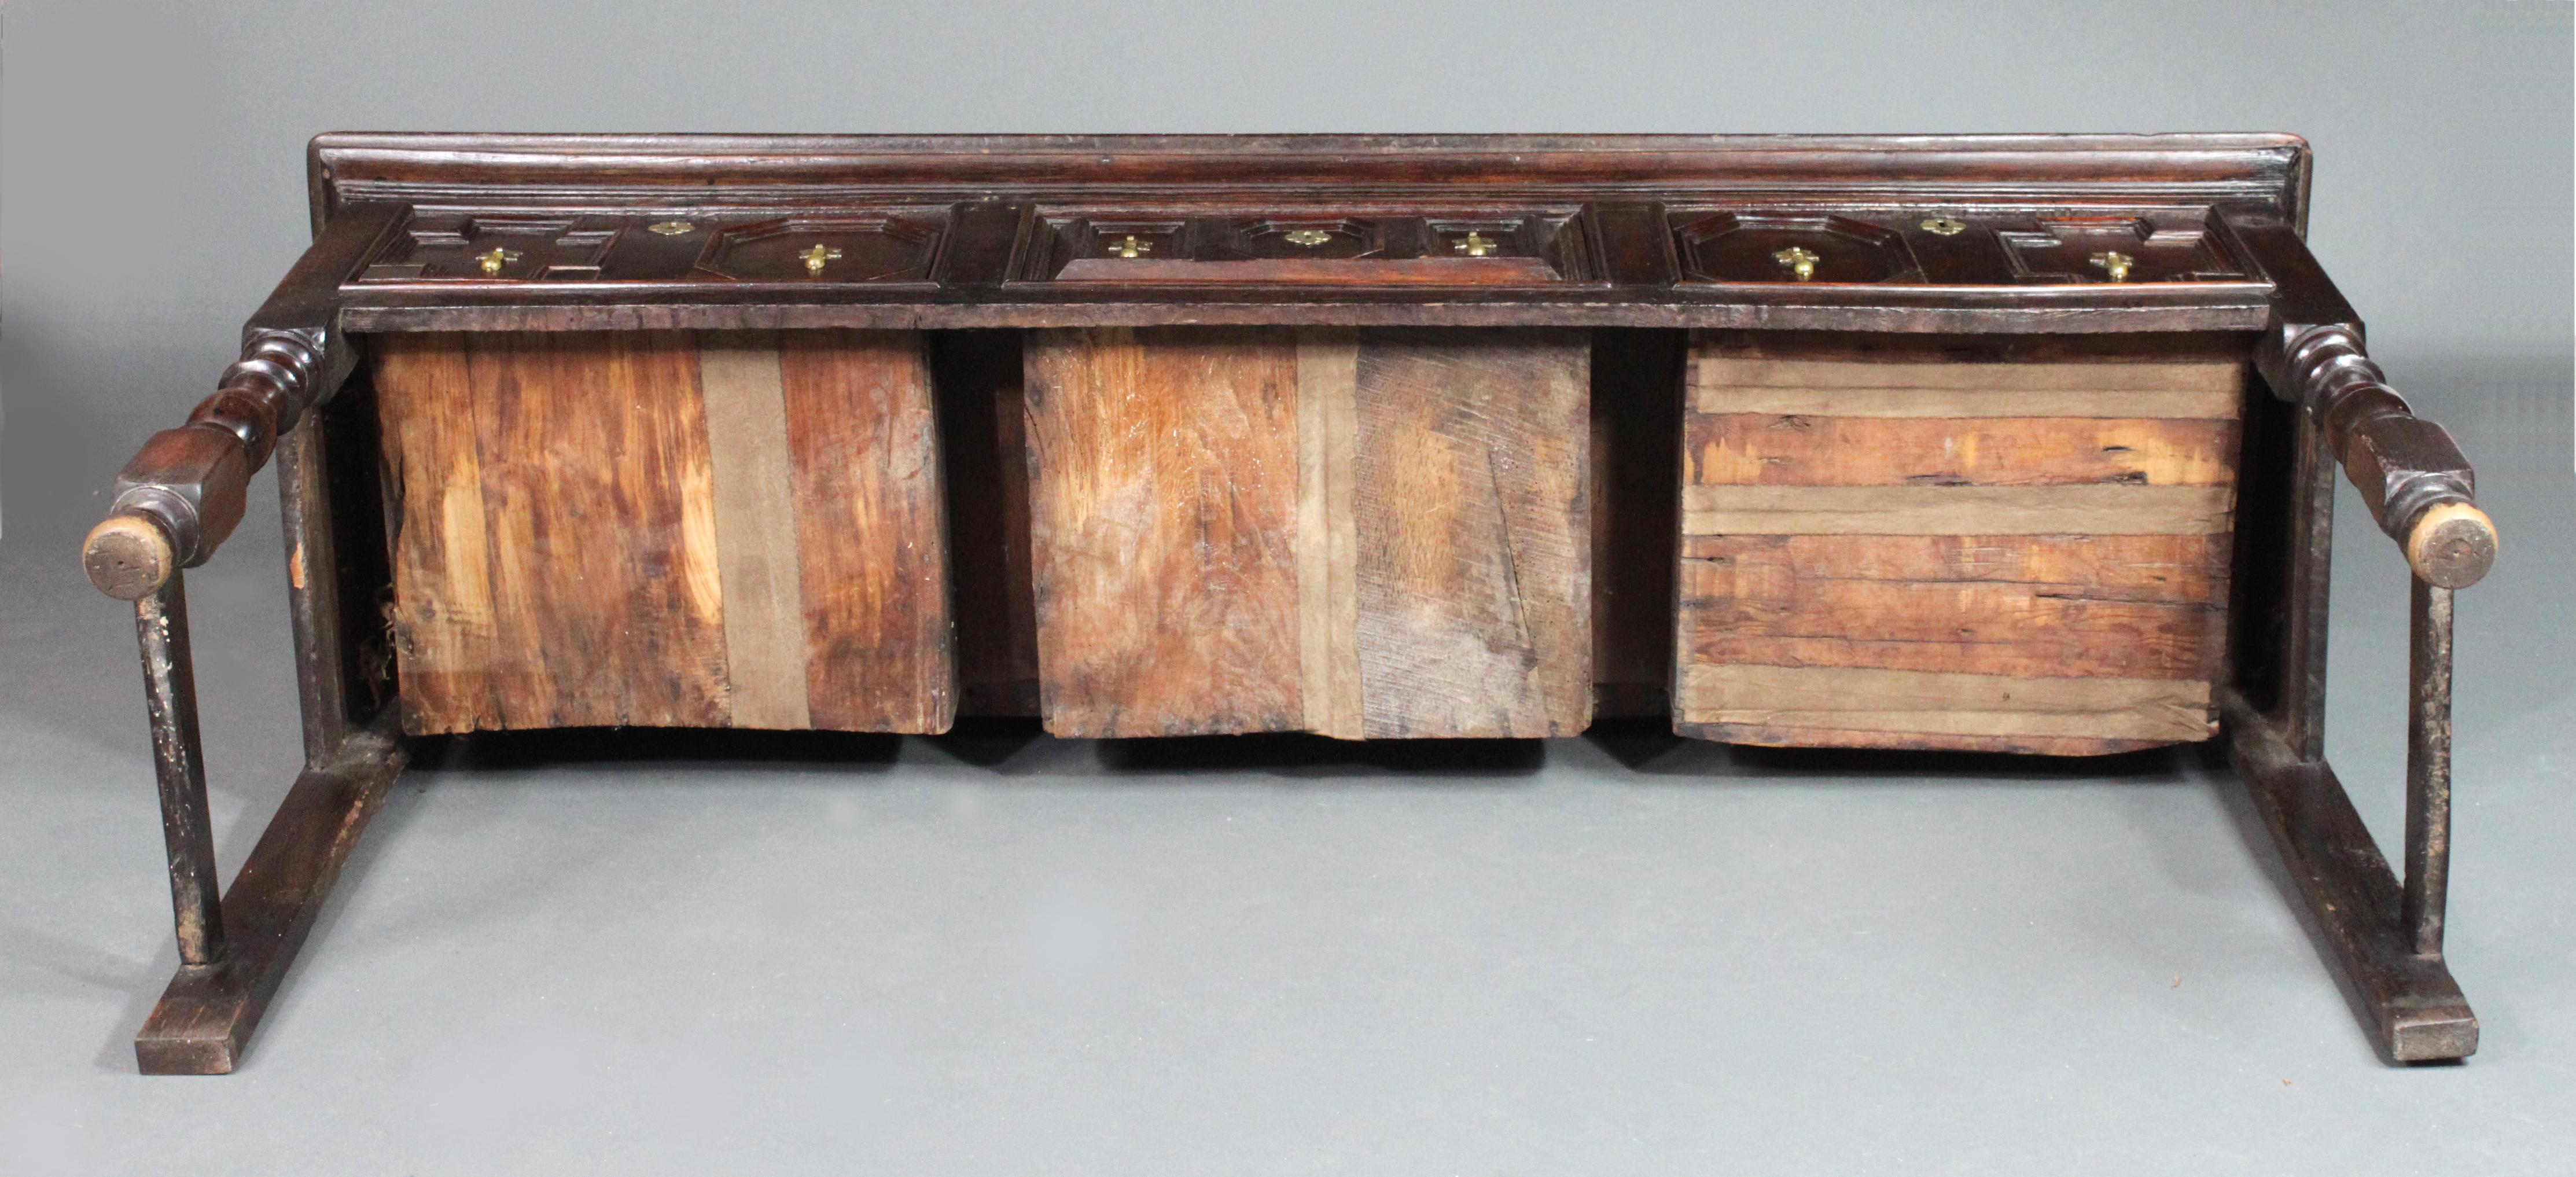 17th Century Oak Serving Dresser with Geometric Moulding on the Drawers 1